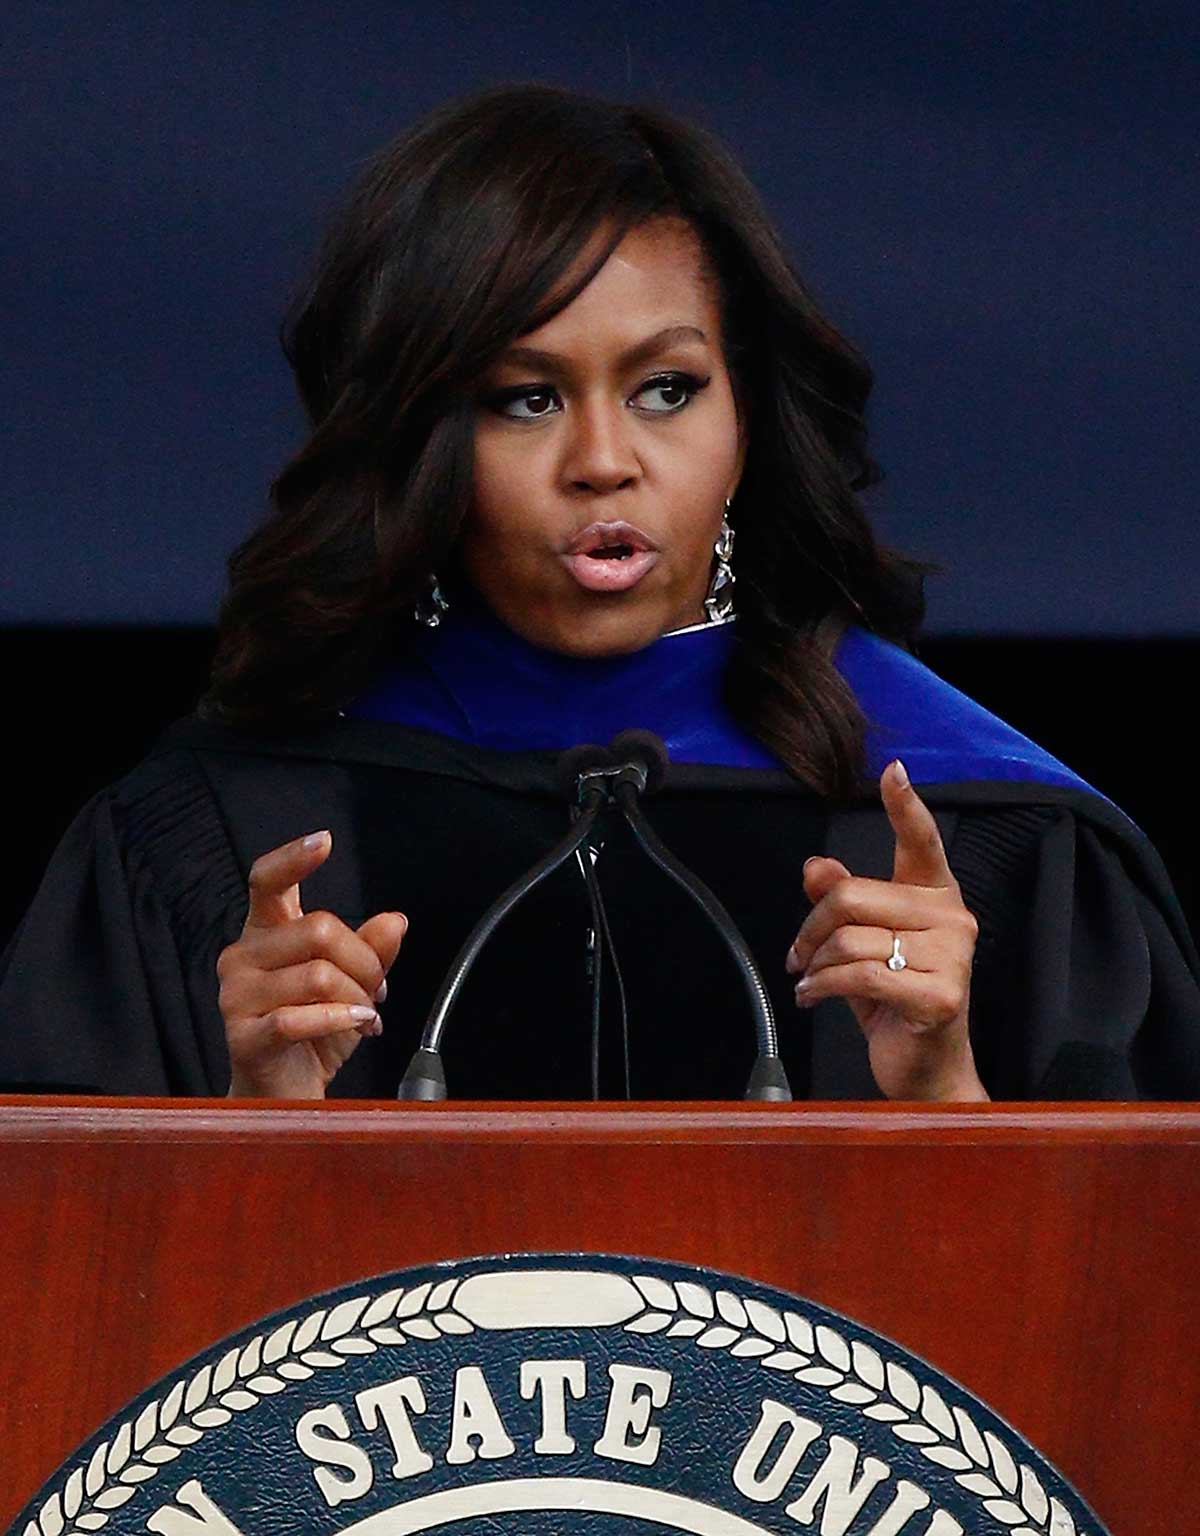 Michelle Obama On Barack Obama’s Ability to ‘Rise Above the Fray’
